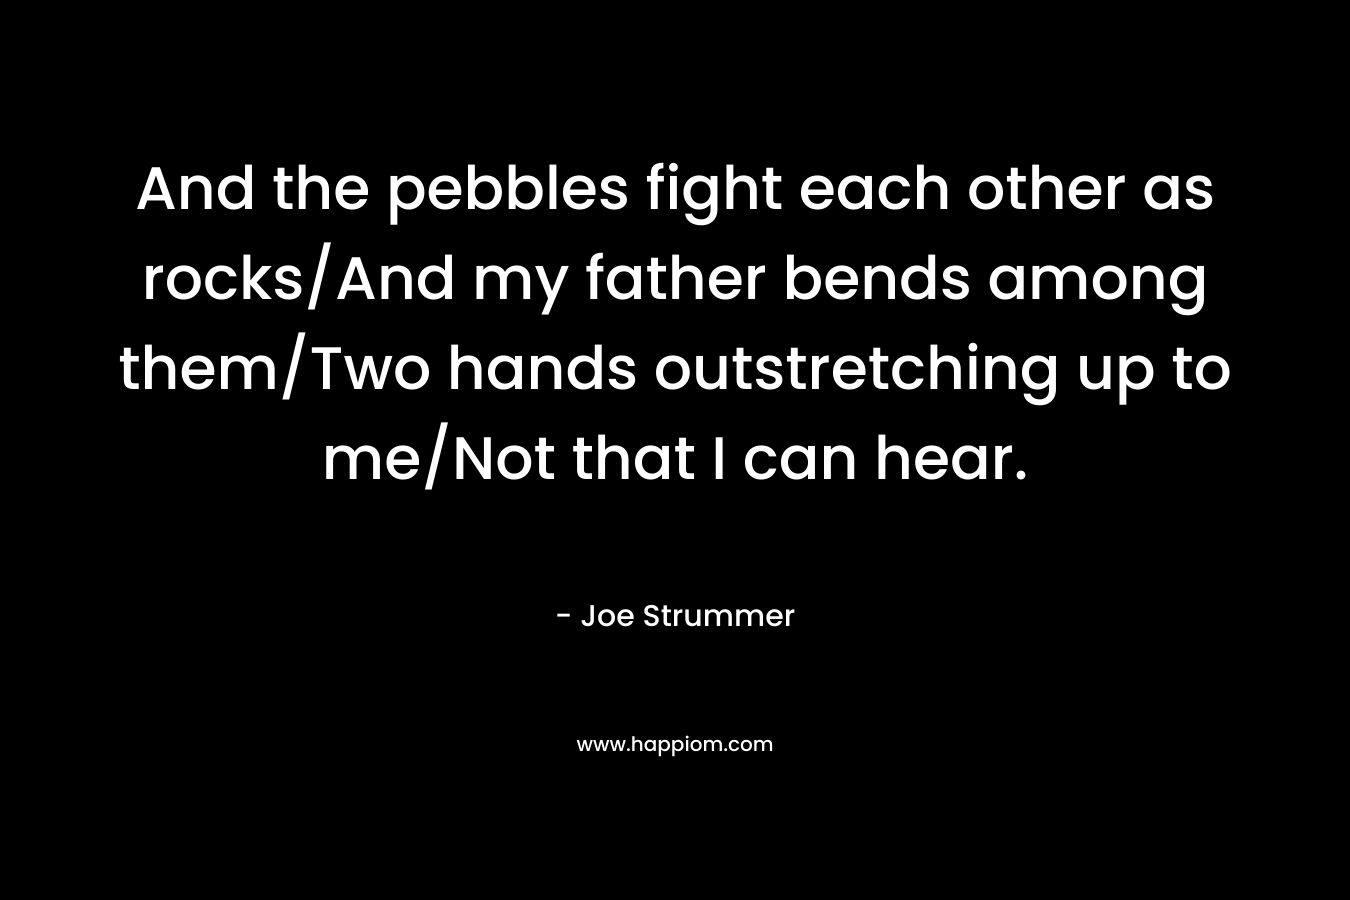 And the pebbles fight each other as rocks/And my father bends among them/Two hands outstretching up to me/Not that I can hear. – Joe Strummer